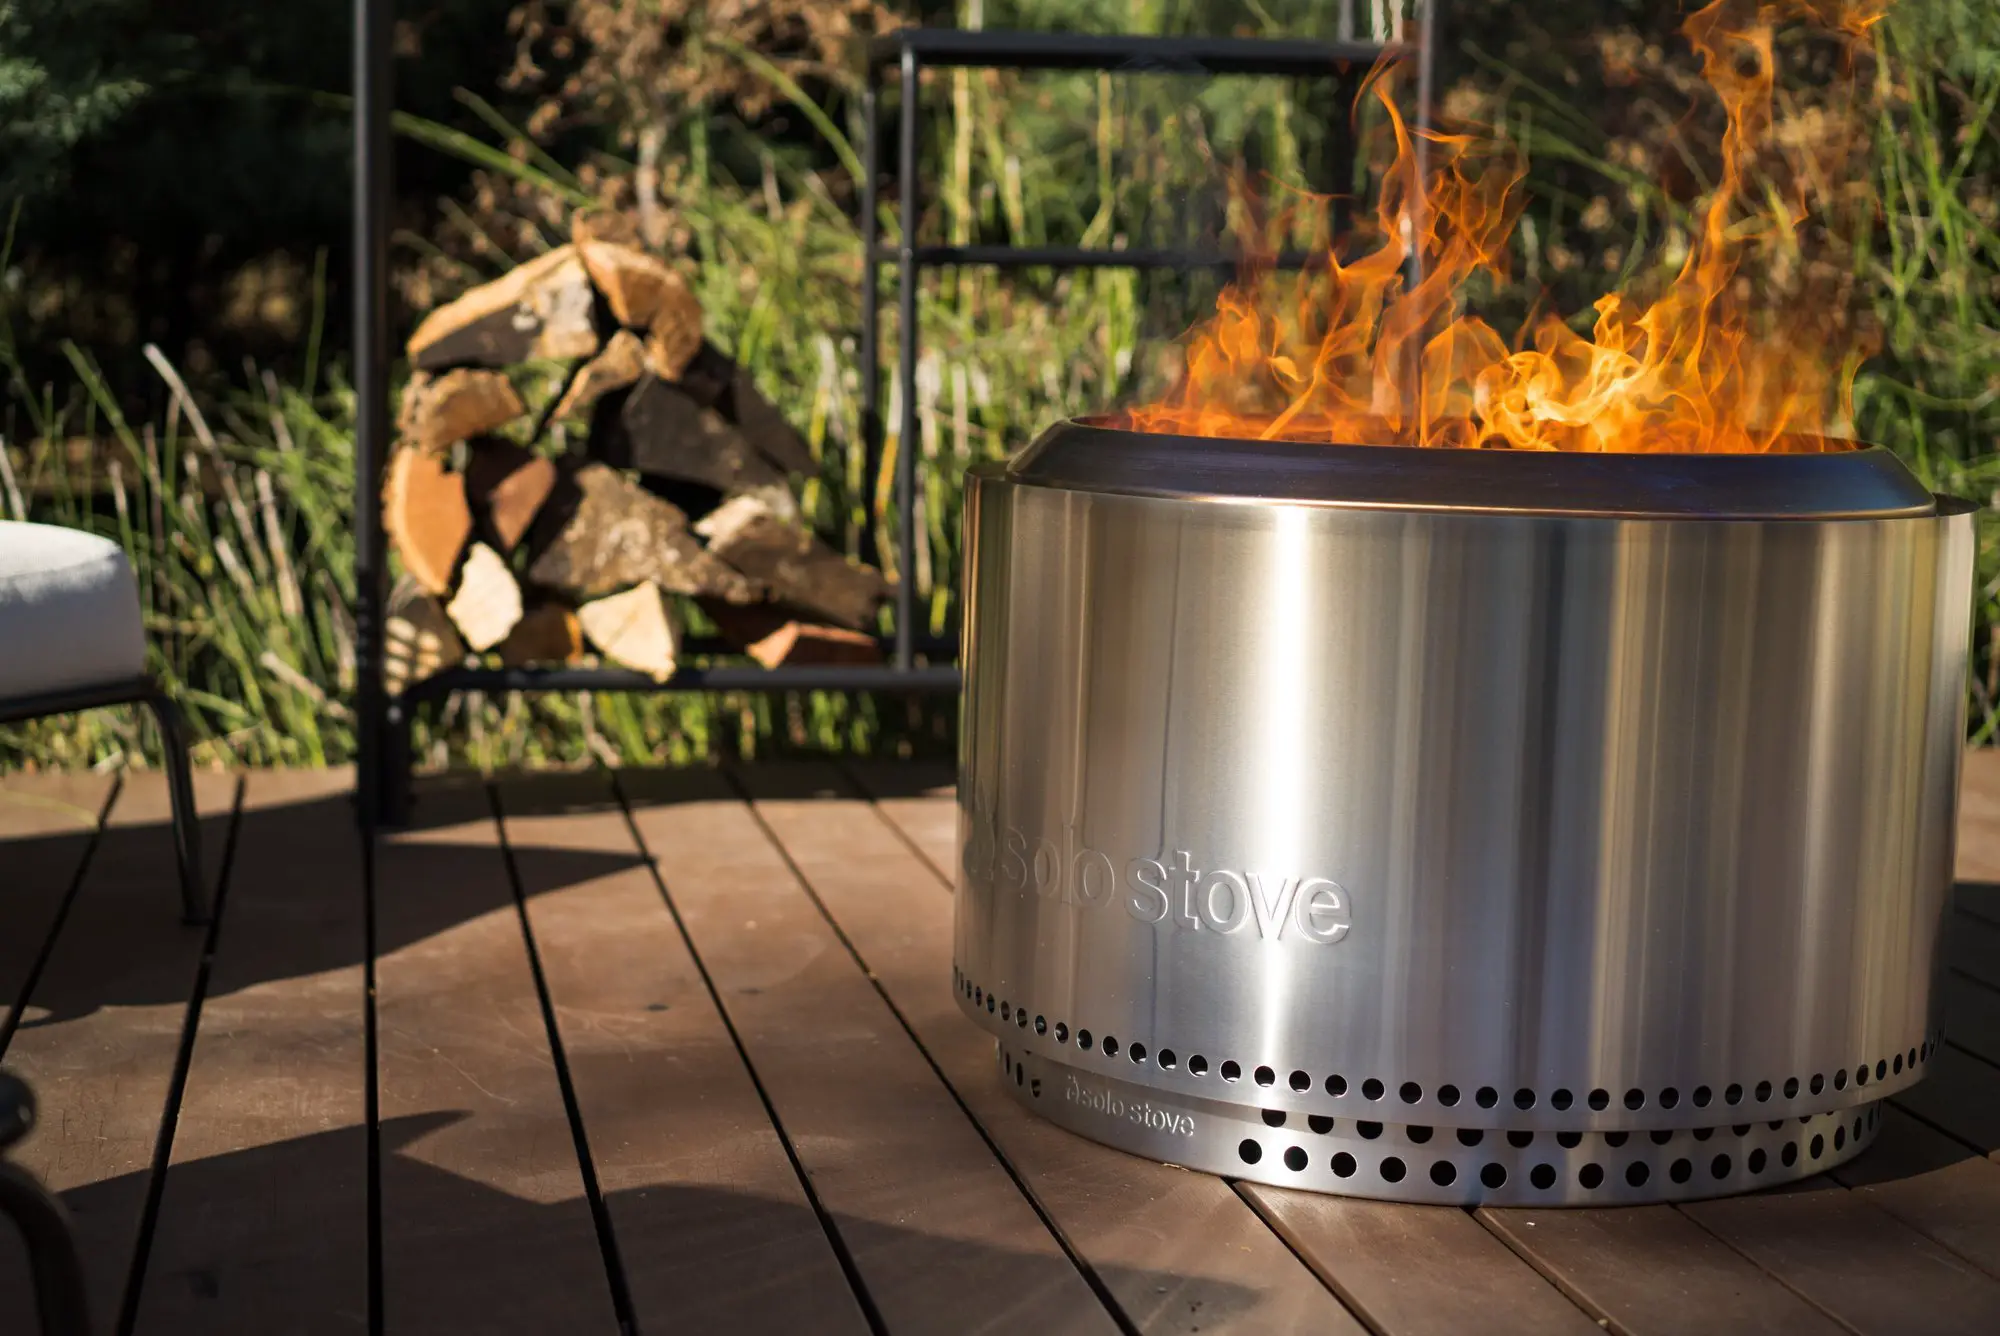 The Only Solo Stove Yukon Review You Need